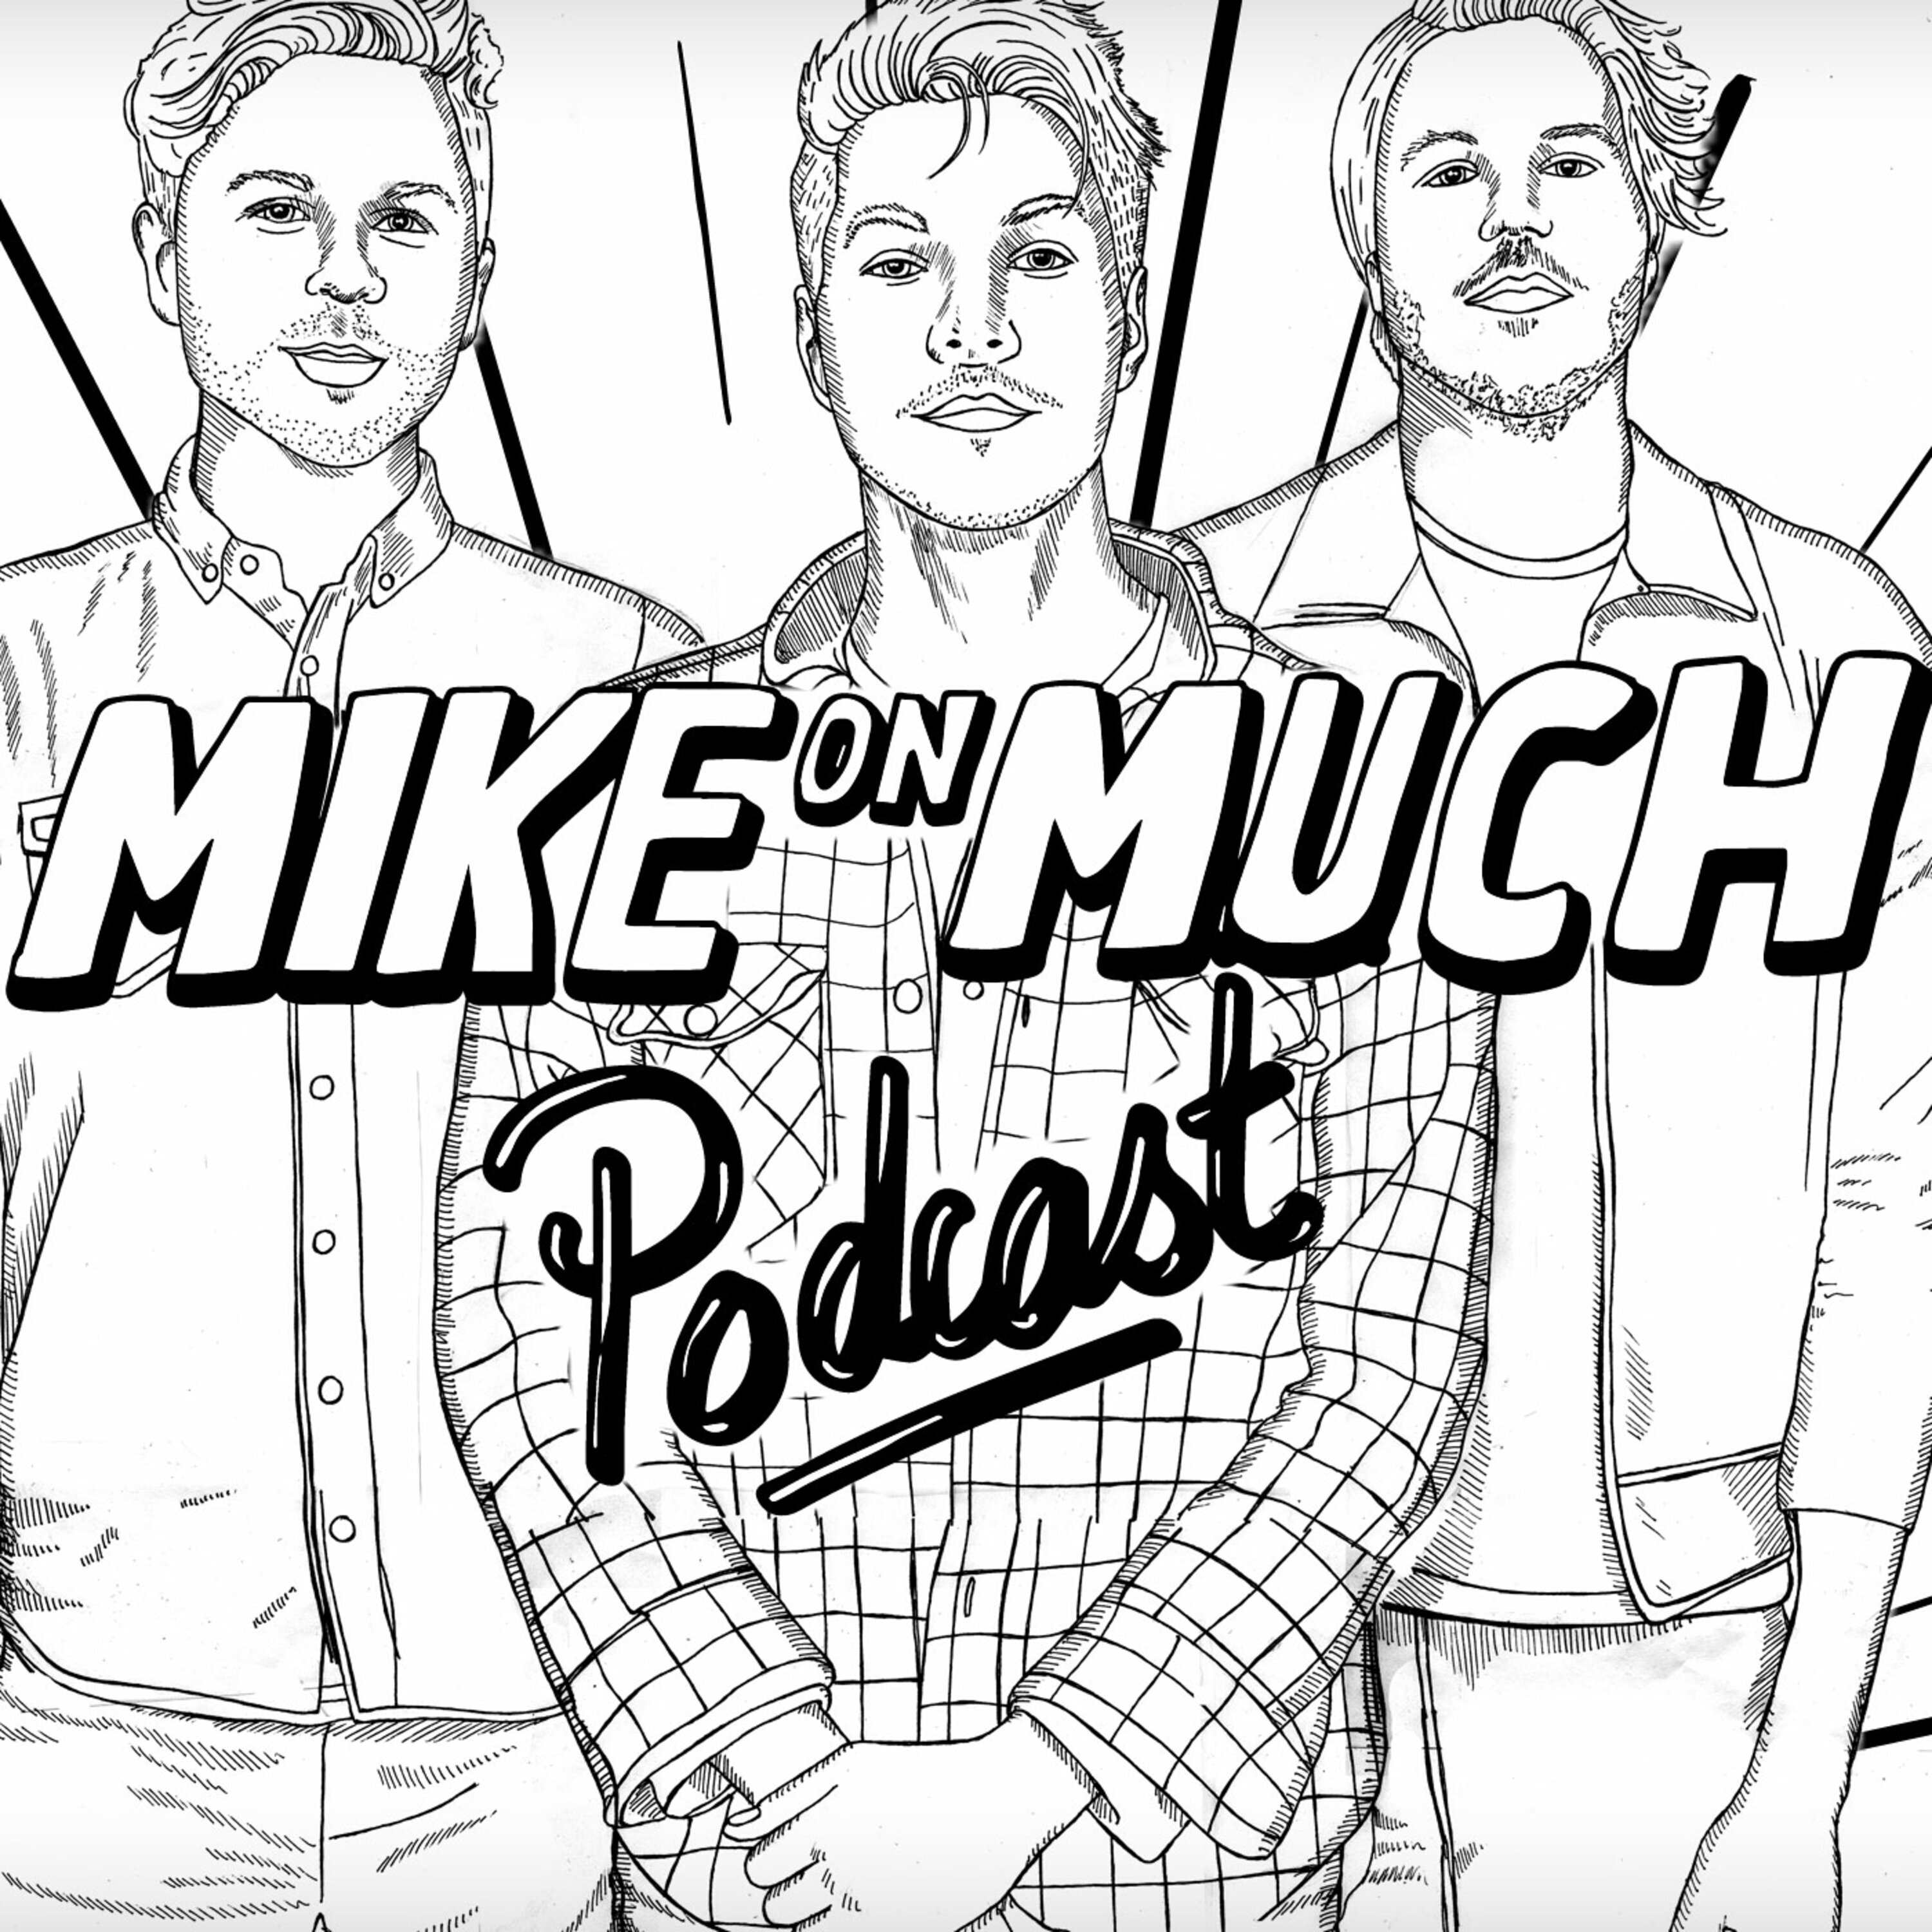 Season 1 Mike On Much: “They Have A Lot Of Sneaky Downtime”